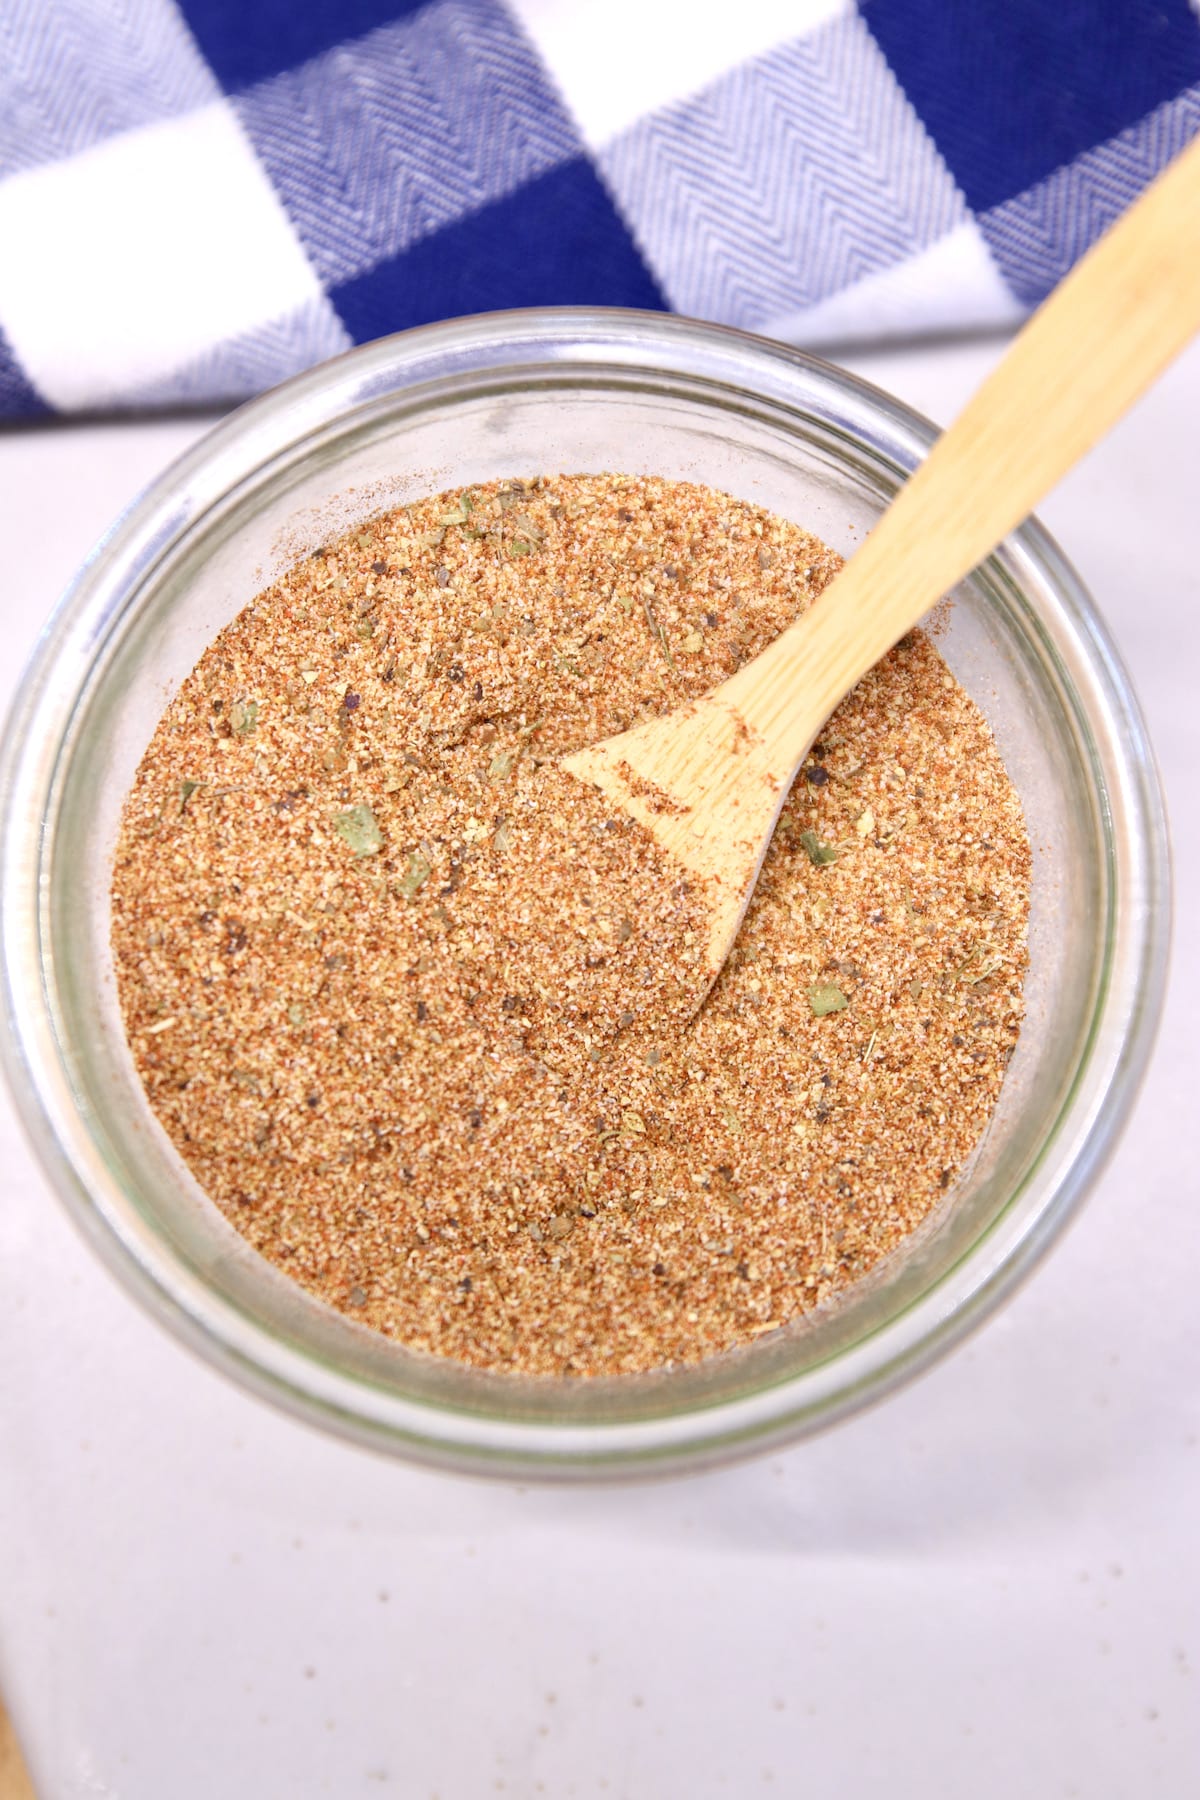 Bowl of homemade Creole seasoning with a wood spoon.